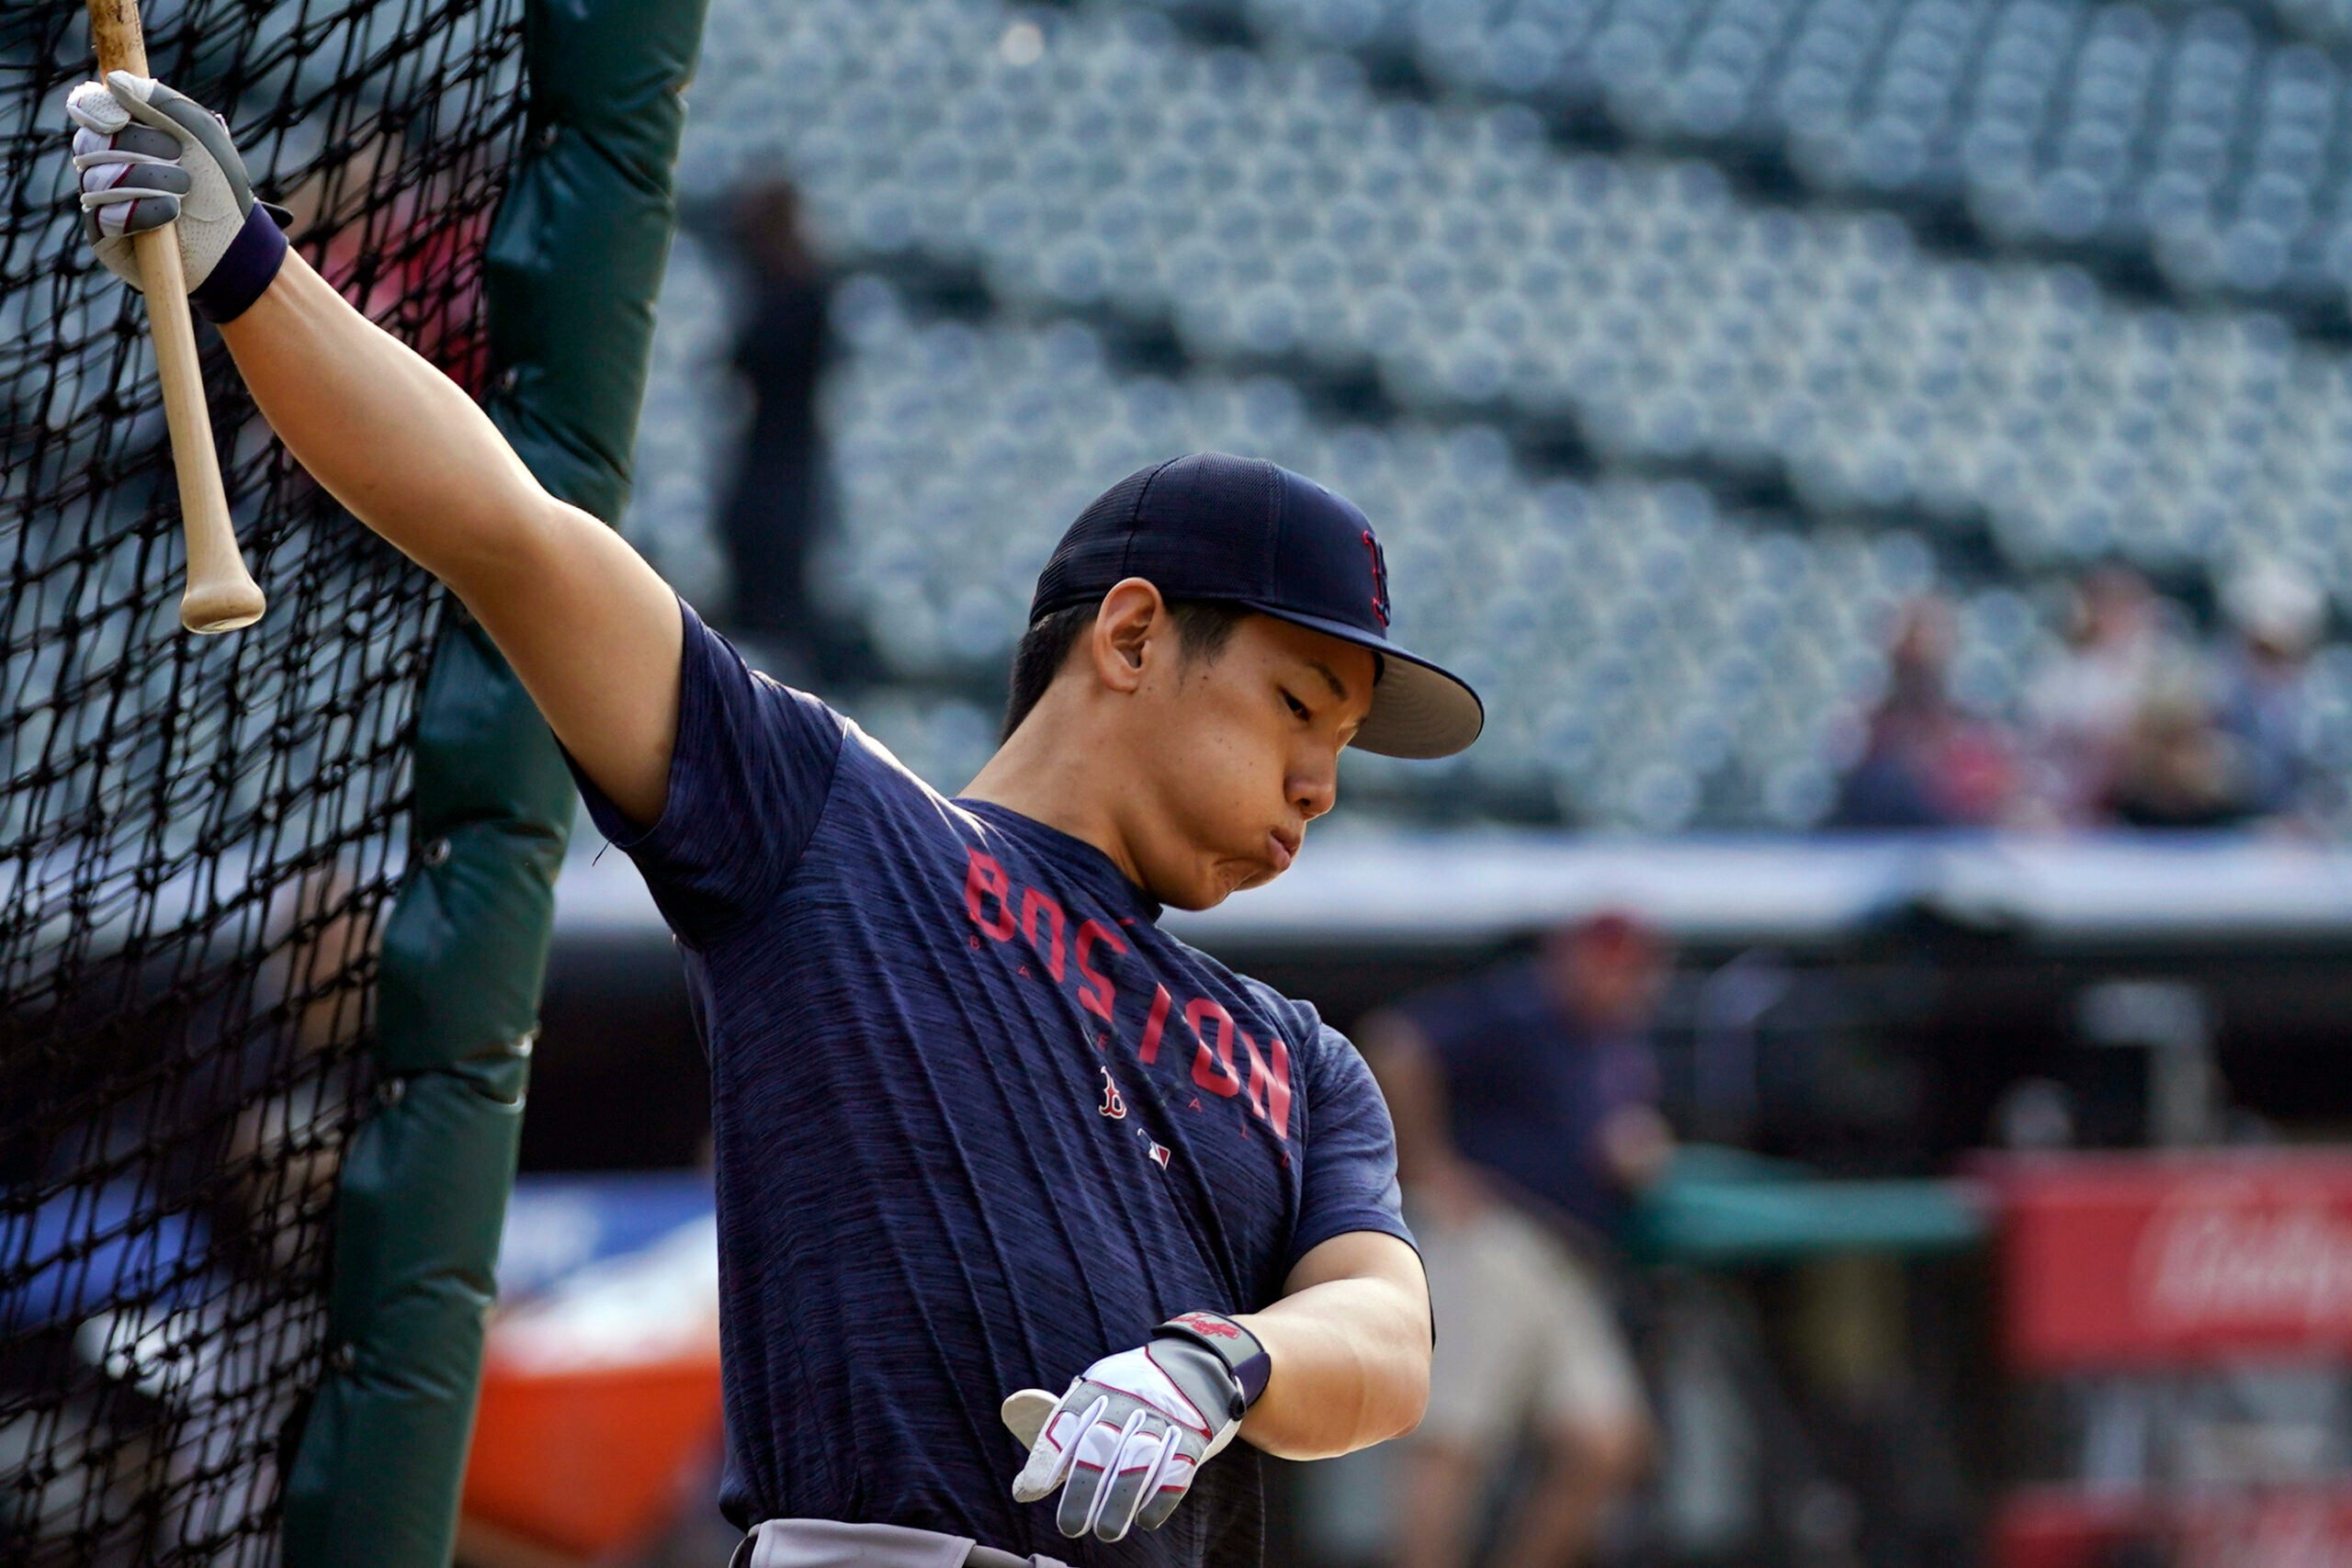 Boston Red Sox outfielder Masataka Yoshida warms up before a baseball game against the Cleveland Guardians.